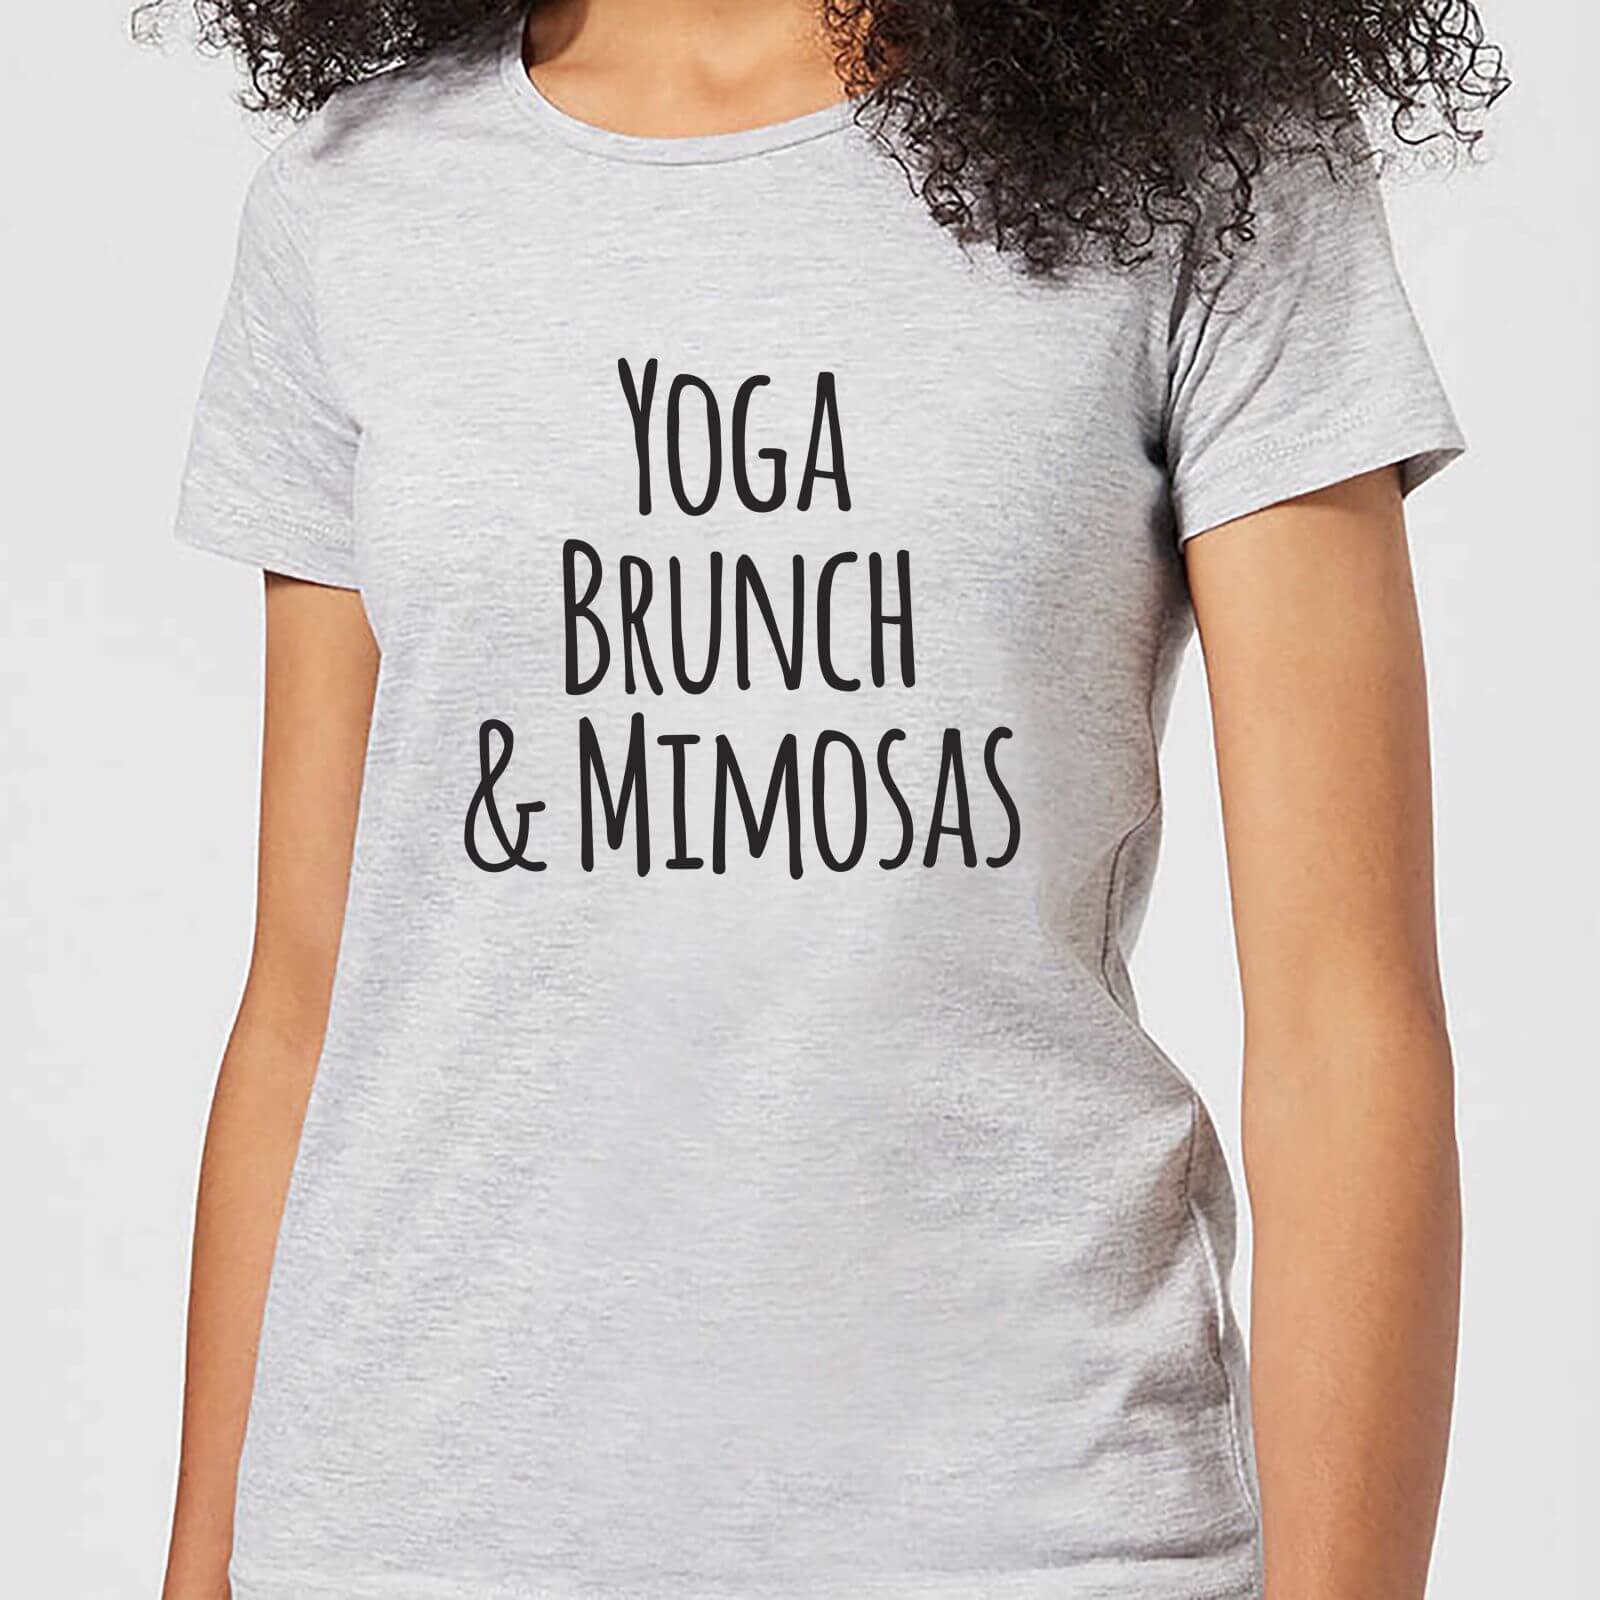 Fitness and Loungewear Yoga Brunch and Mimosas Women's T-Shirt - Grey - 5XL - Grey